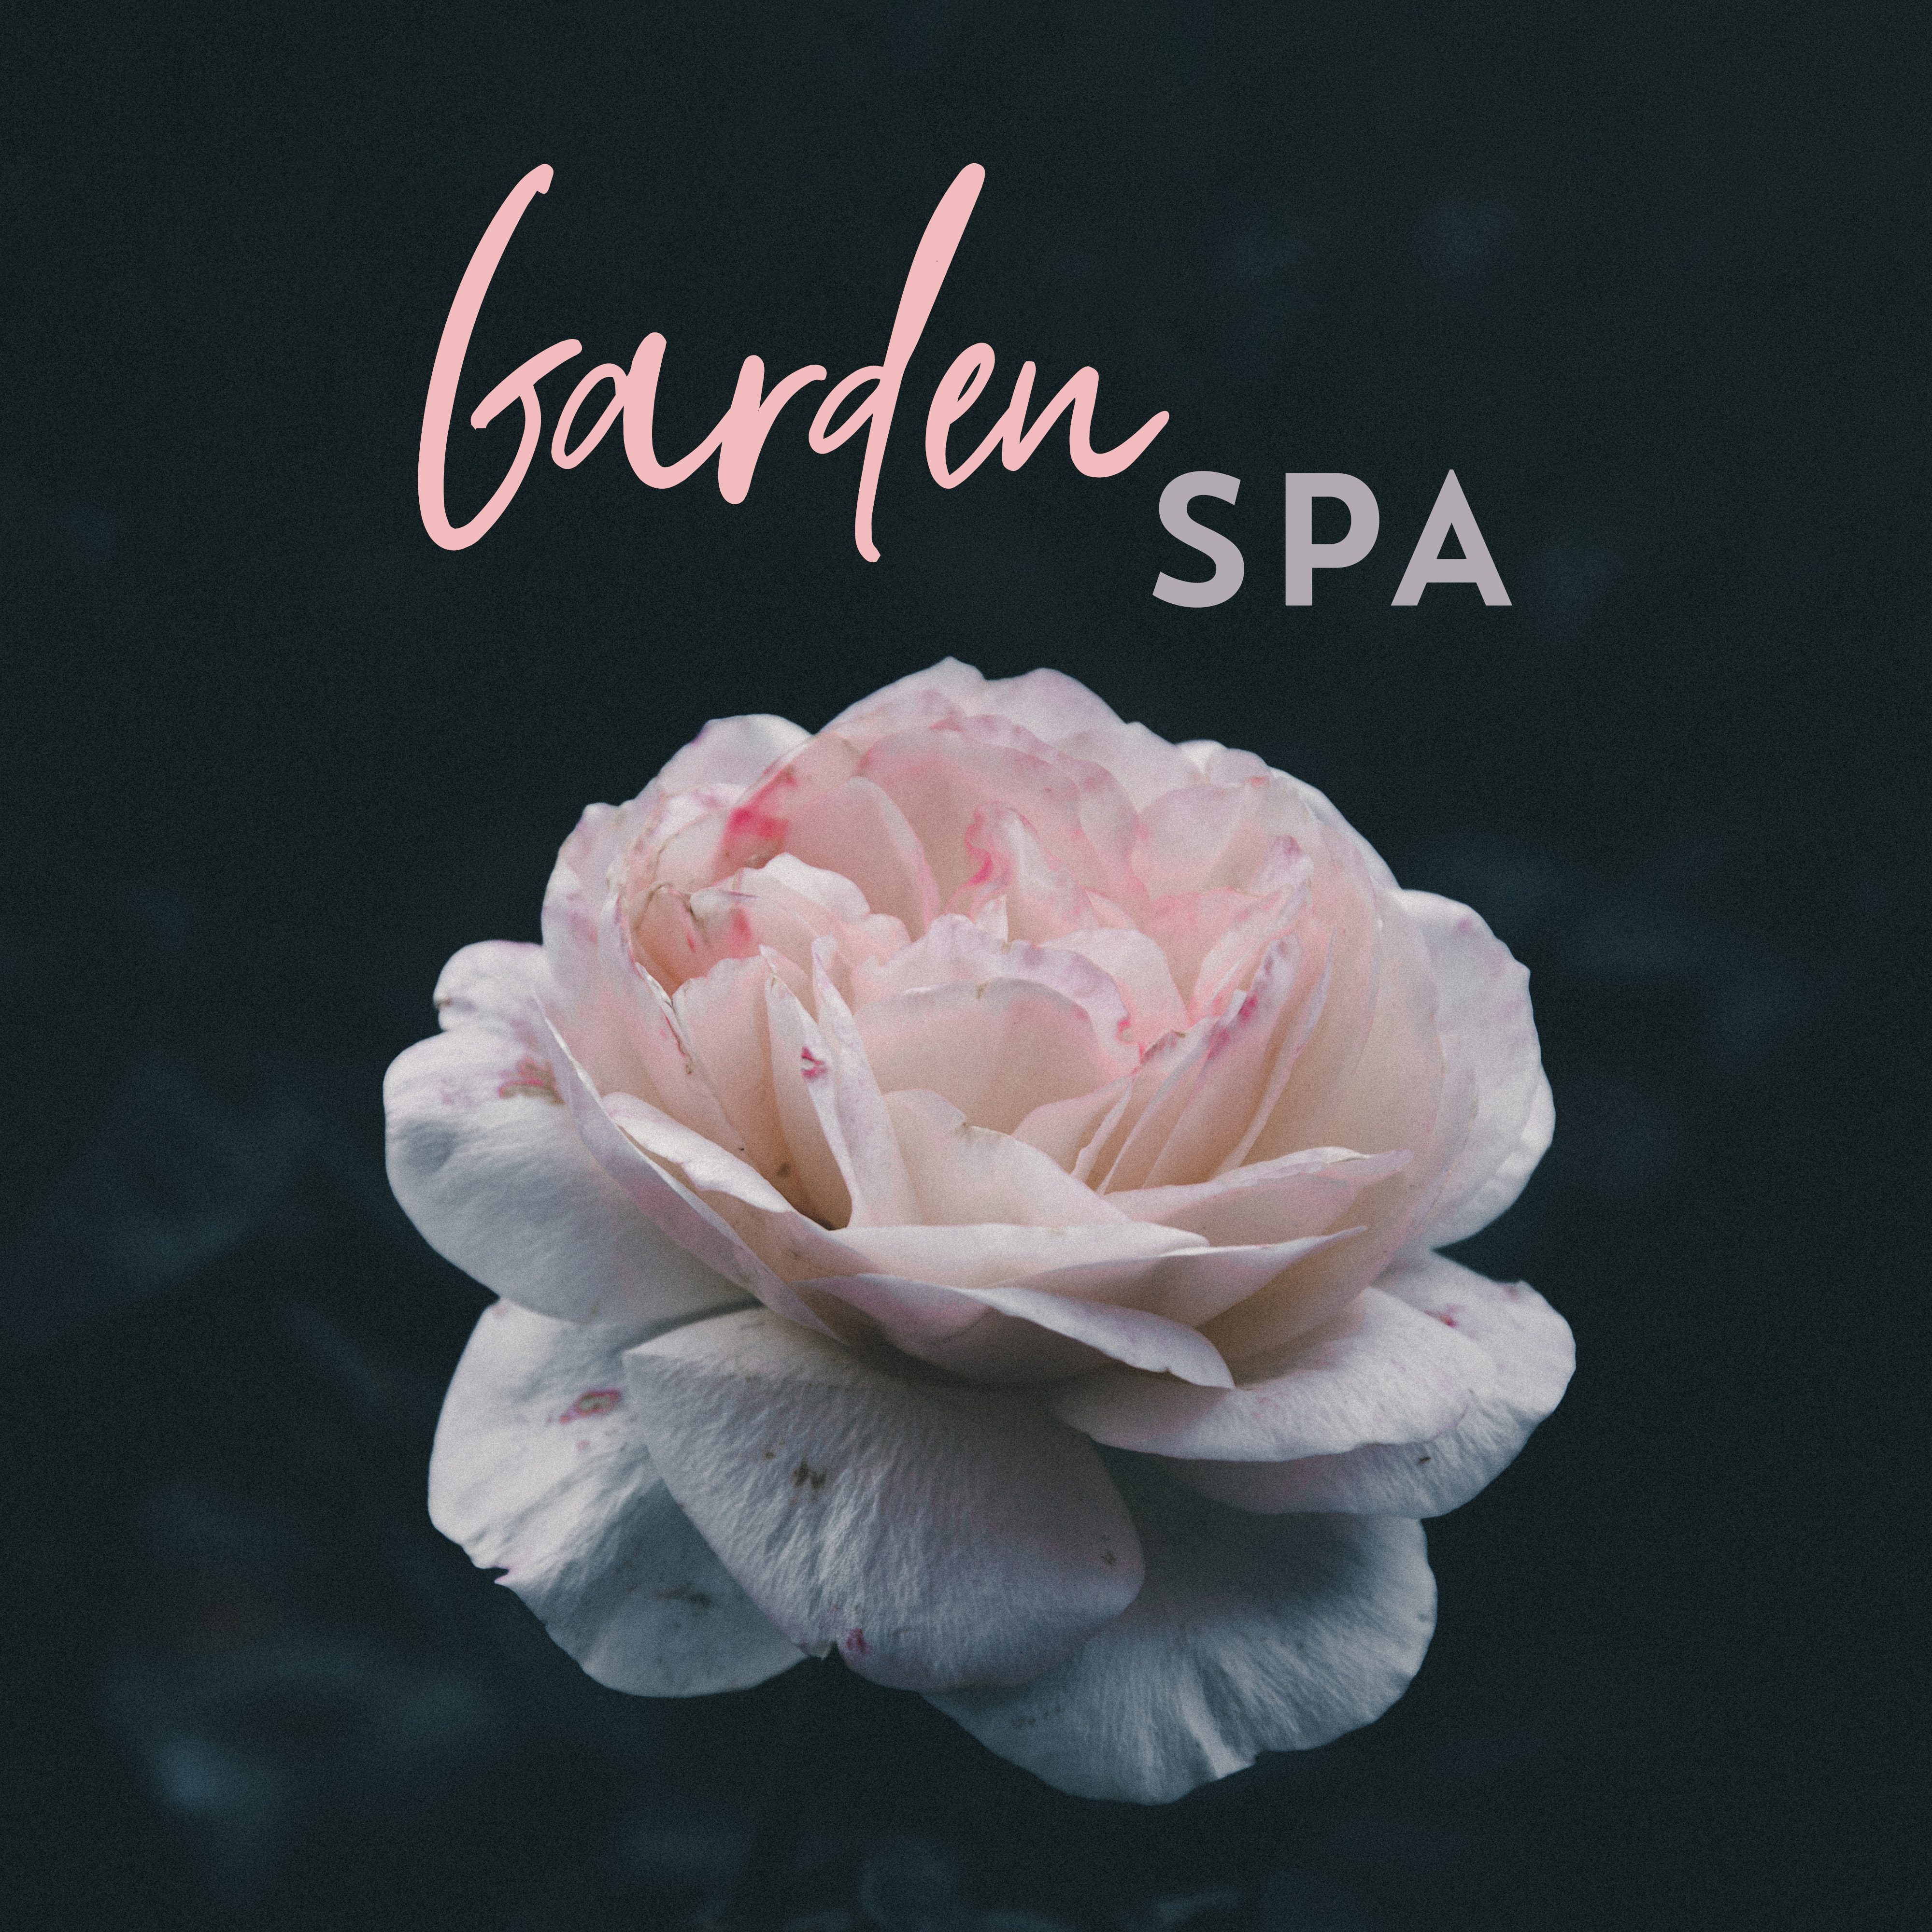 Garden SPA: Relaxing Music for SPA, Massage, Therapy, Sleeping